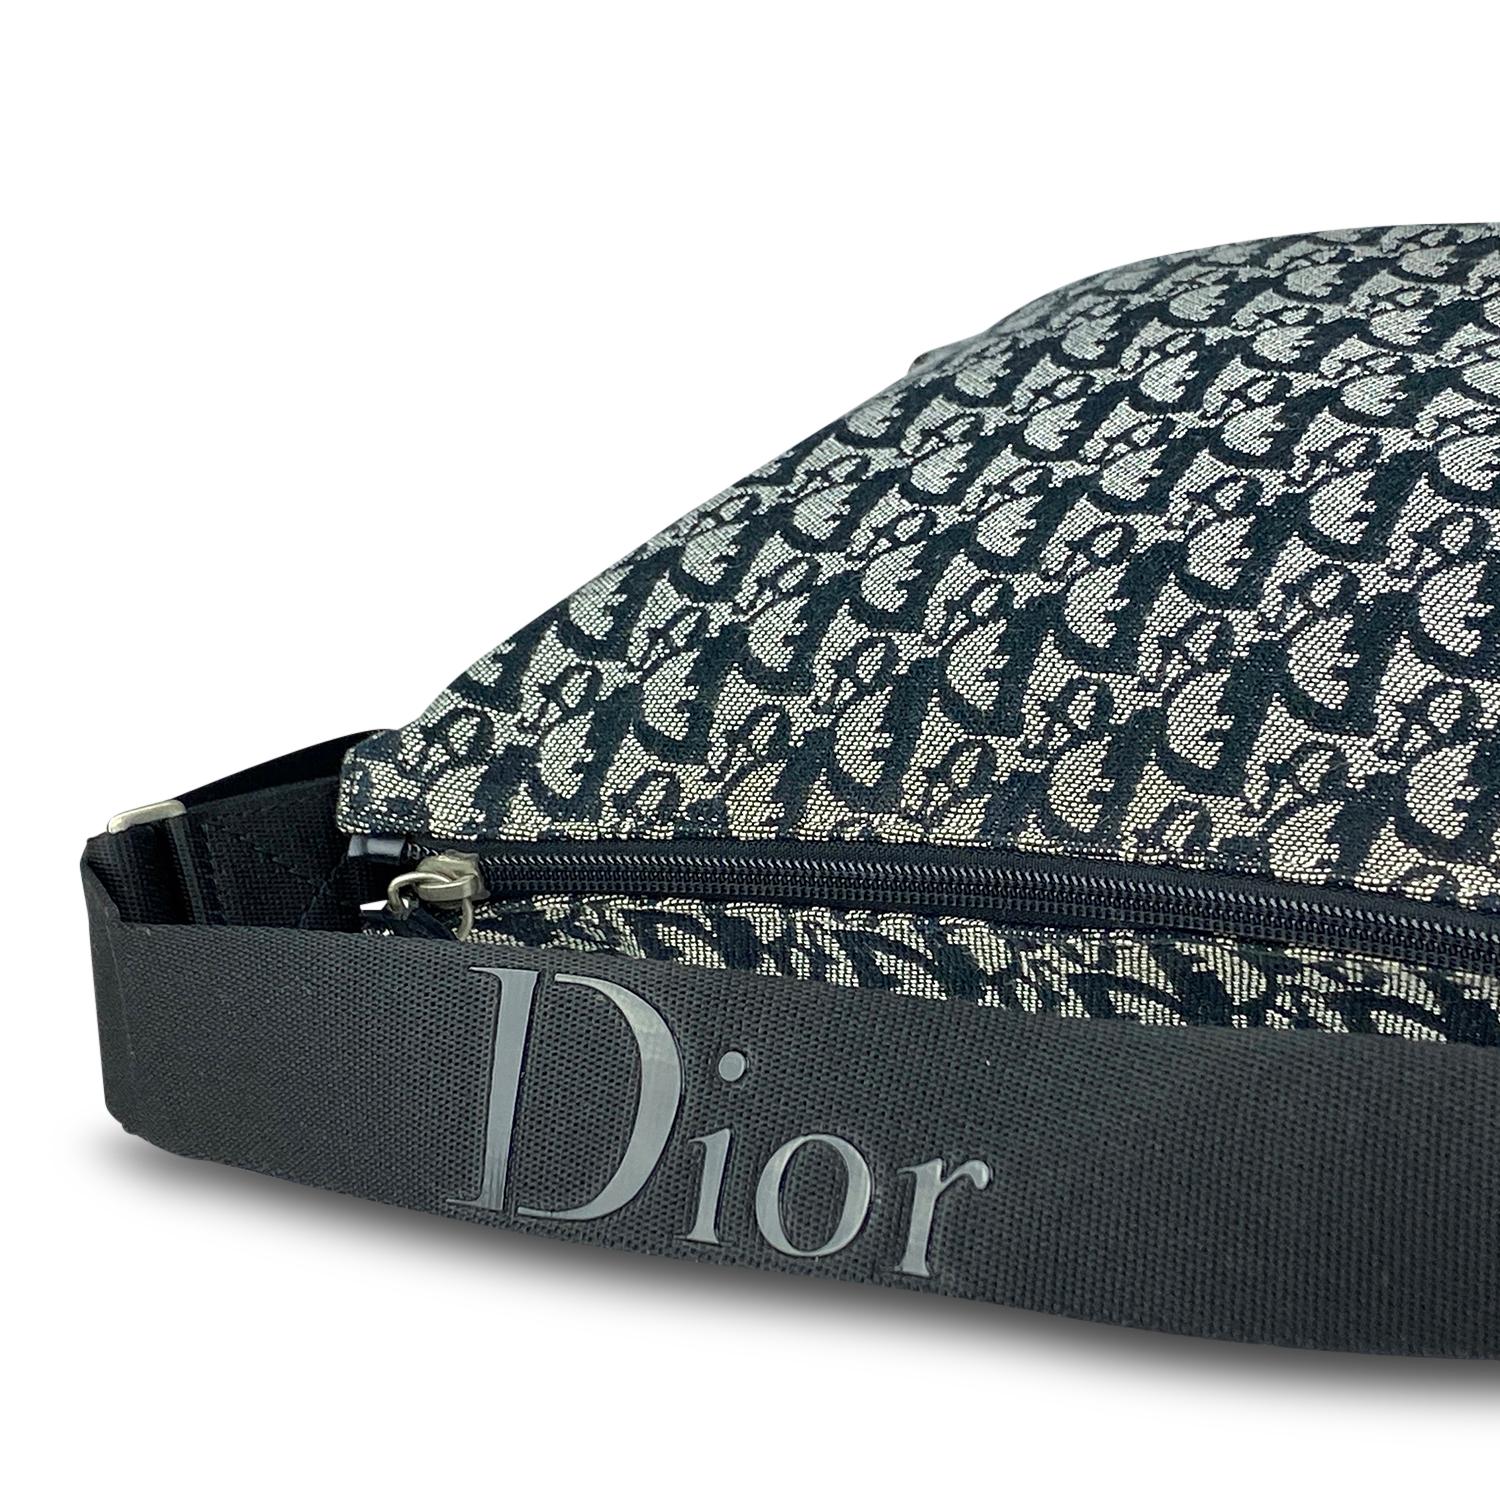 Christian Dior Diorissimo Messenger Bag In Good Condition For Sale In Sundbyberg, SE